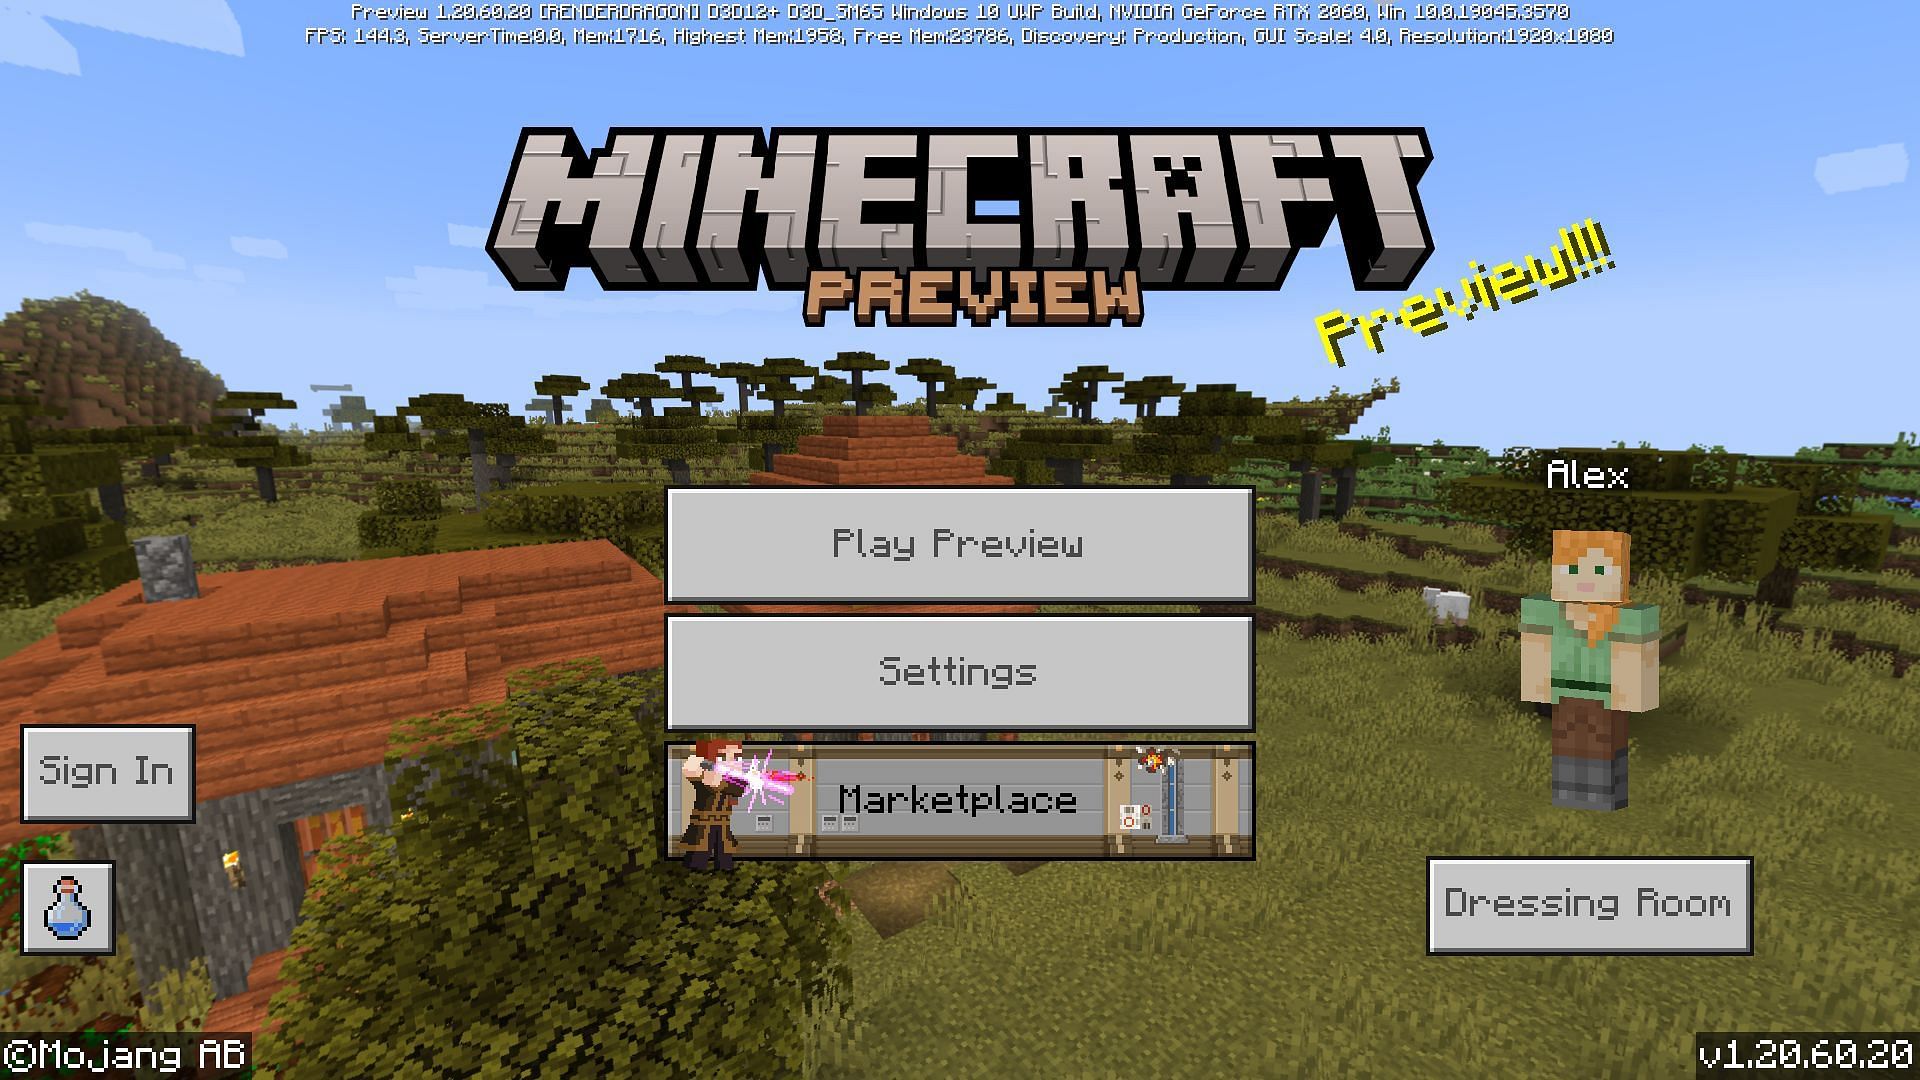 How to download Minecraft Bedrock 1.20.60.20 beta and preview